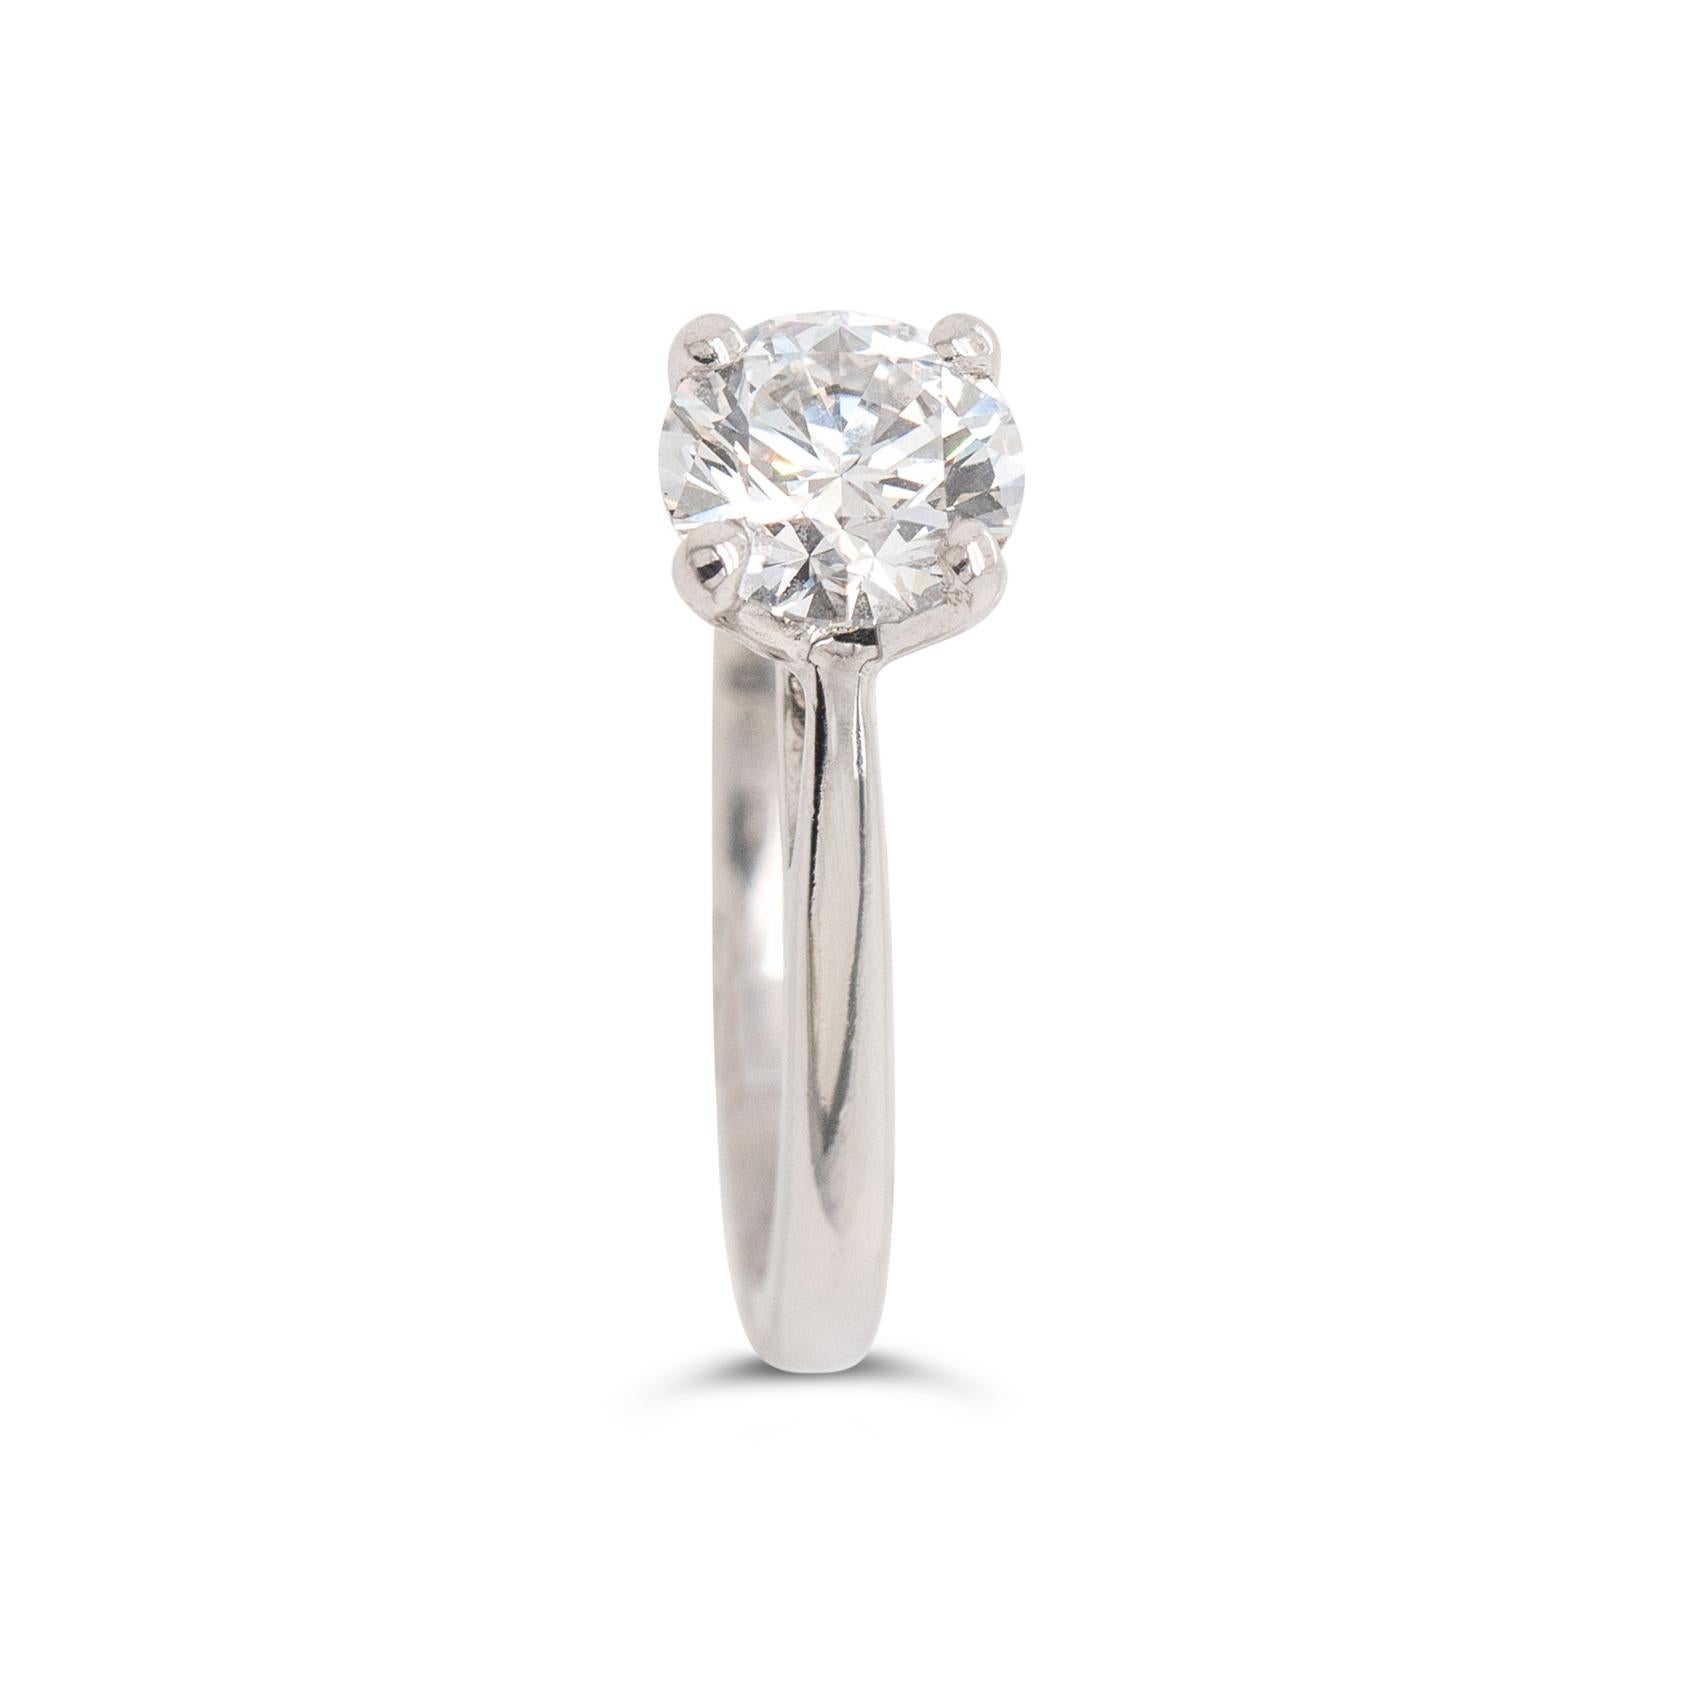 Condition: Pre-owned with mild/light scratches
Material: Platinum 
Main Stone: Diamond
Carat Weight: 0.84tcw
Diamond Colour/Clarity: D/Si1
Item Weight: 4.2g
Size: H
Produced by 'Monique Lhuillier', presented in a branded box and includes a GIA